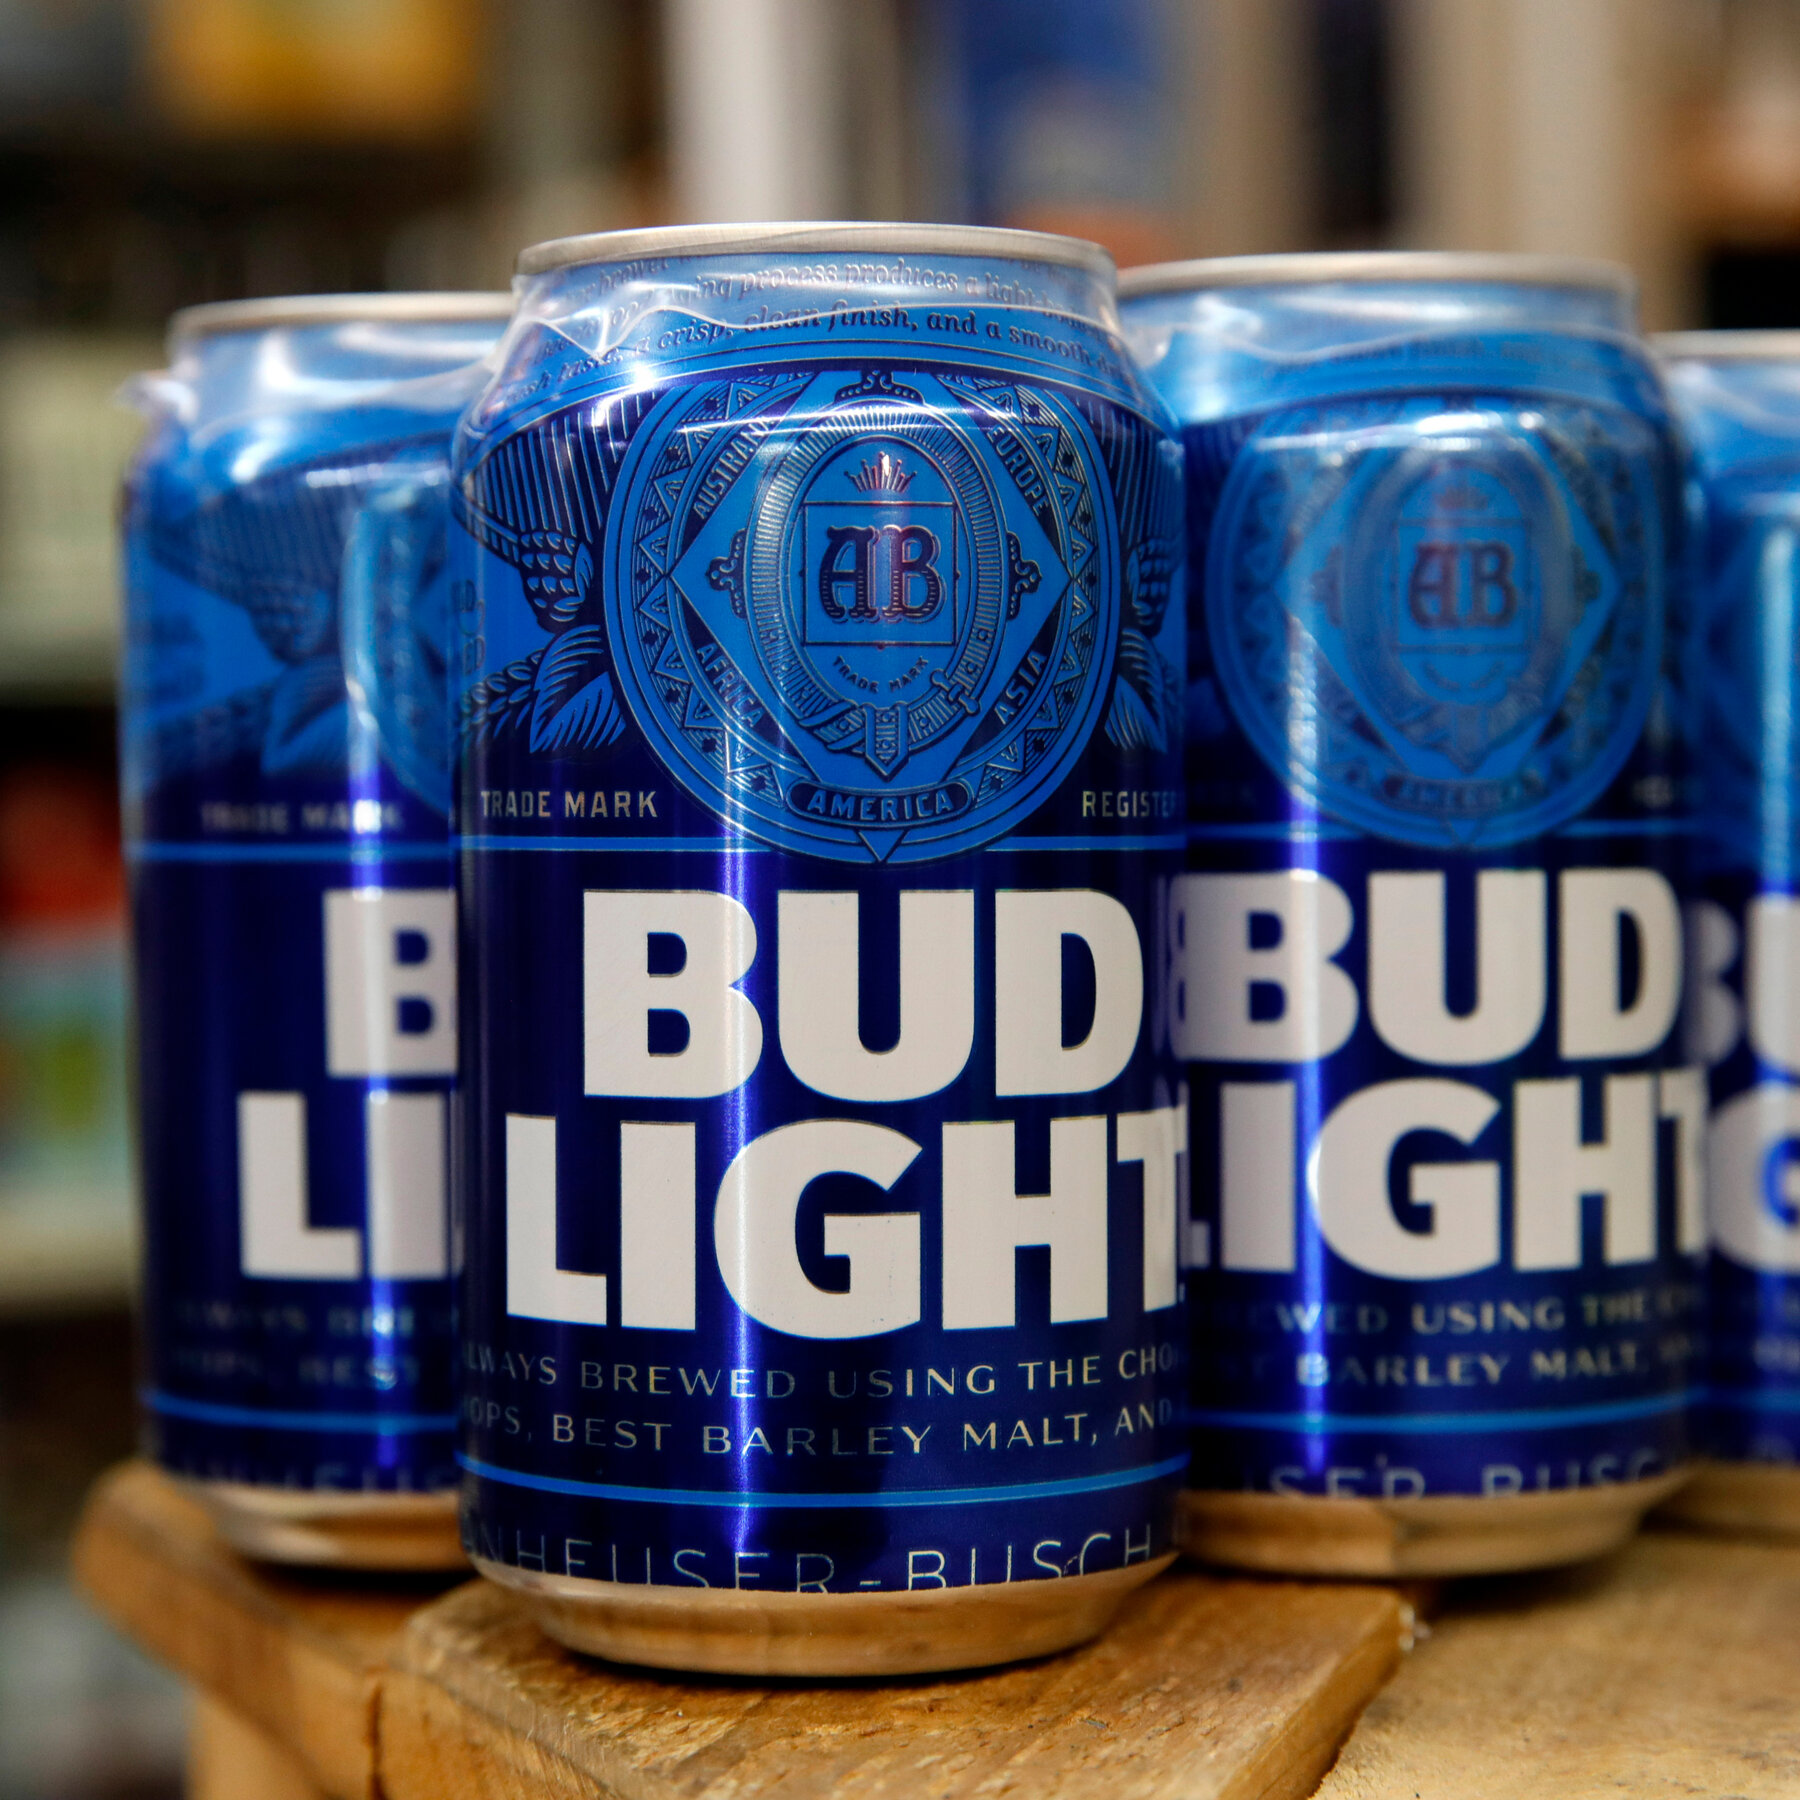 Bud Light Celebrates Narrow Win Over Warm Urine in Latest Beer Rankings: “We’re Back!”